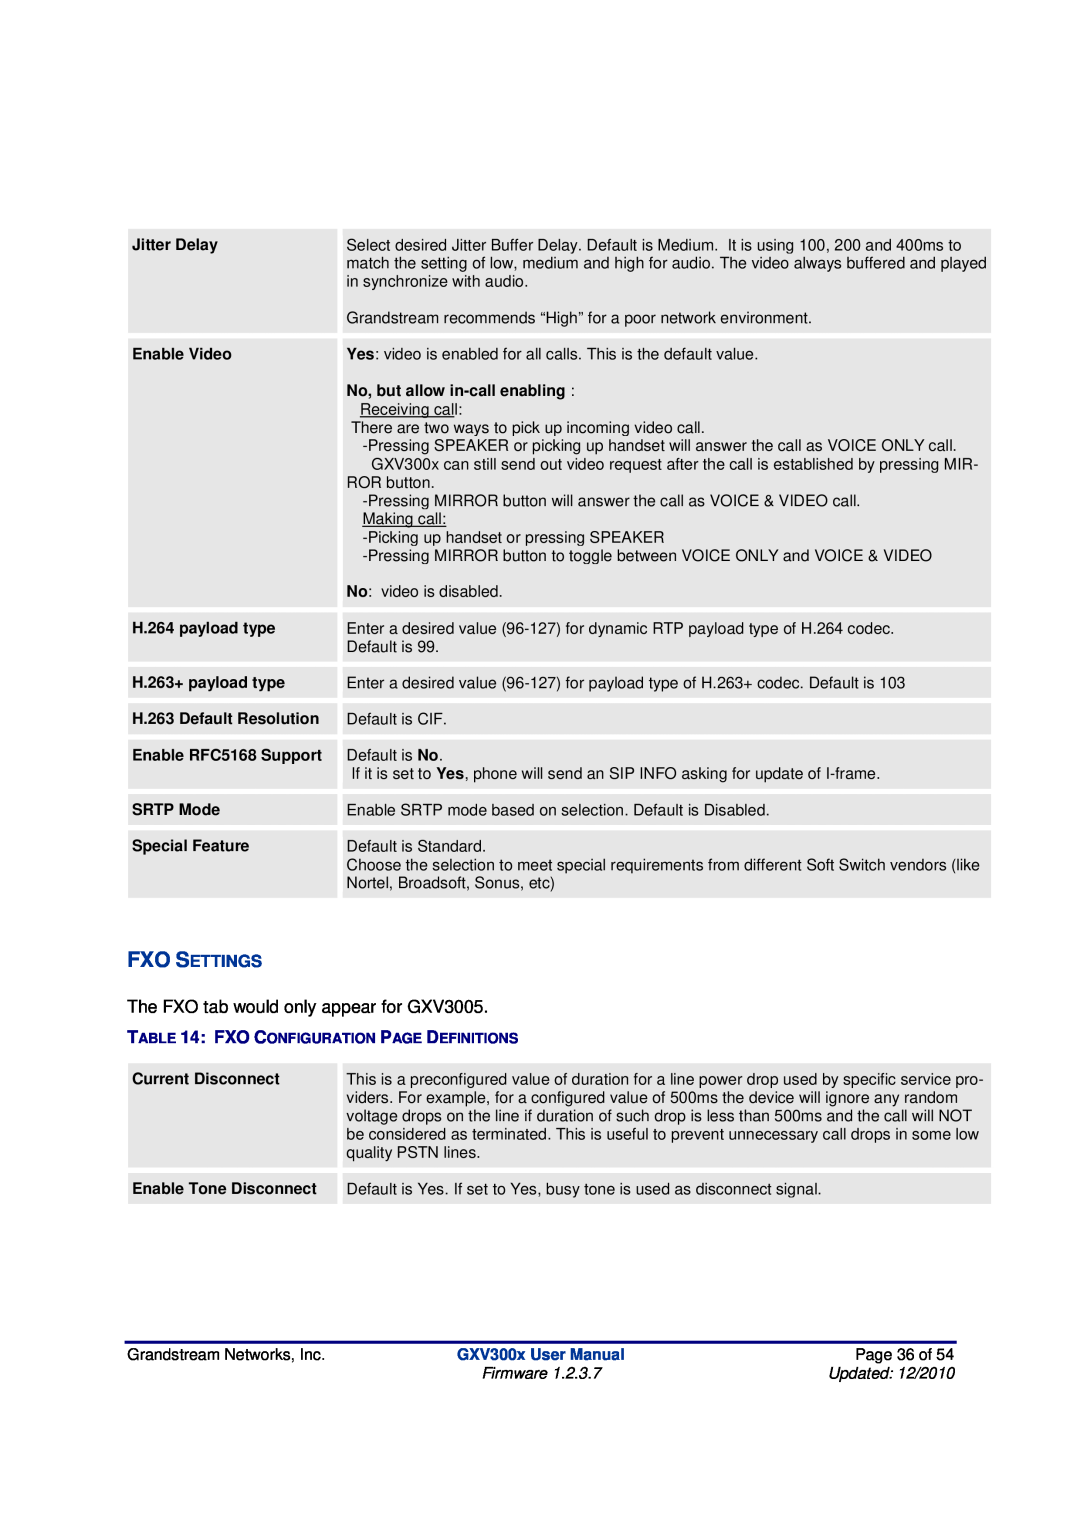 Grandstream Networks GXV300X manual The FXO tab would only appear for GXV3005, Fxo Settings, Grandstream Networks, Inc 